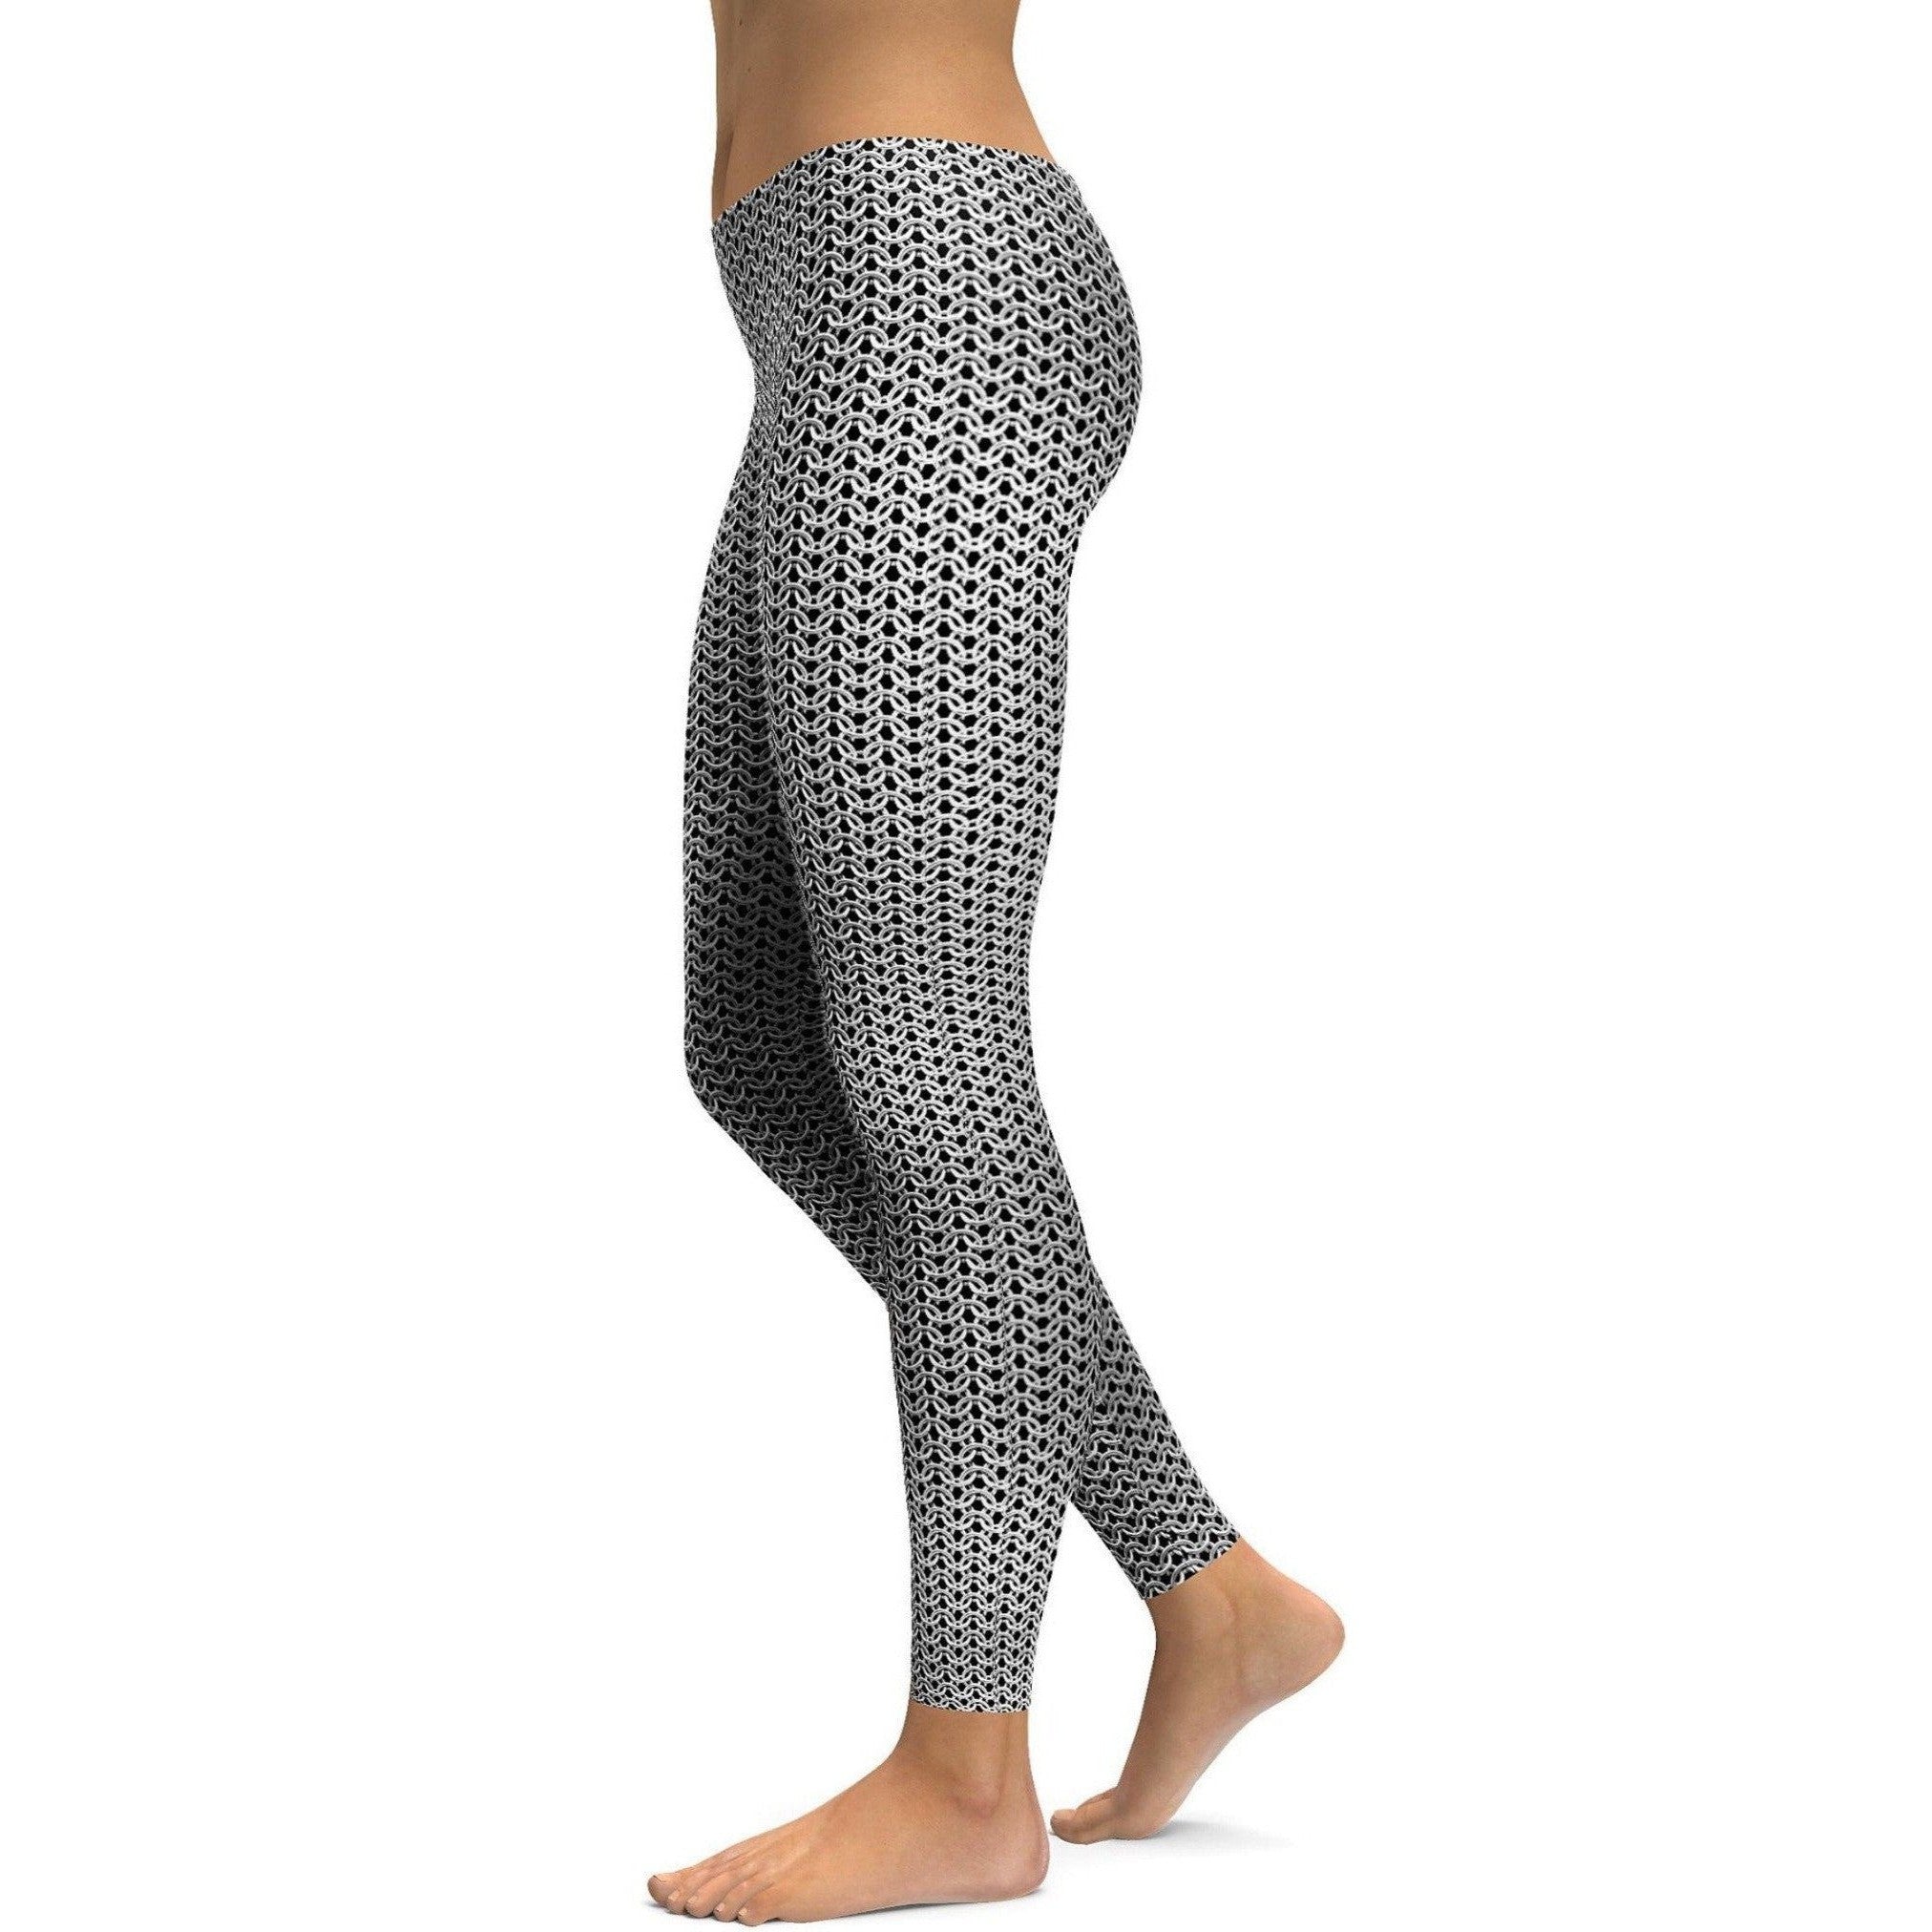 Womens Workout Yoga Knight's Chain Mail Leggings Grey/Black | Gearbunch.com